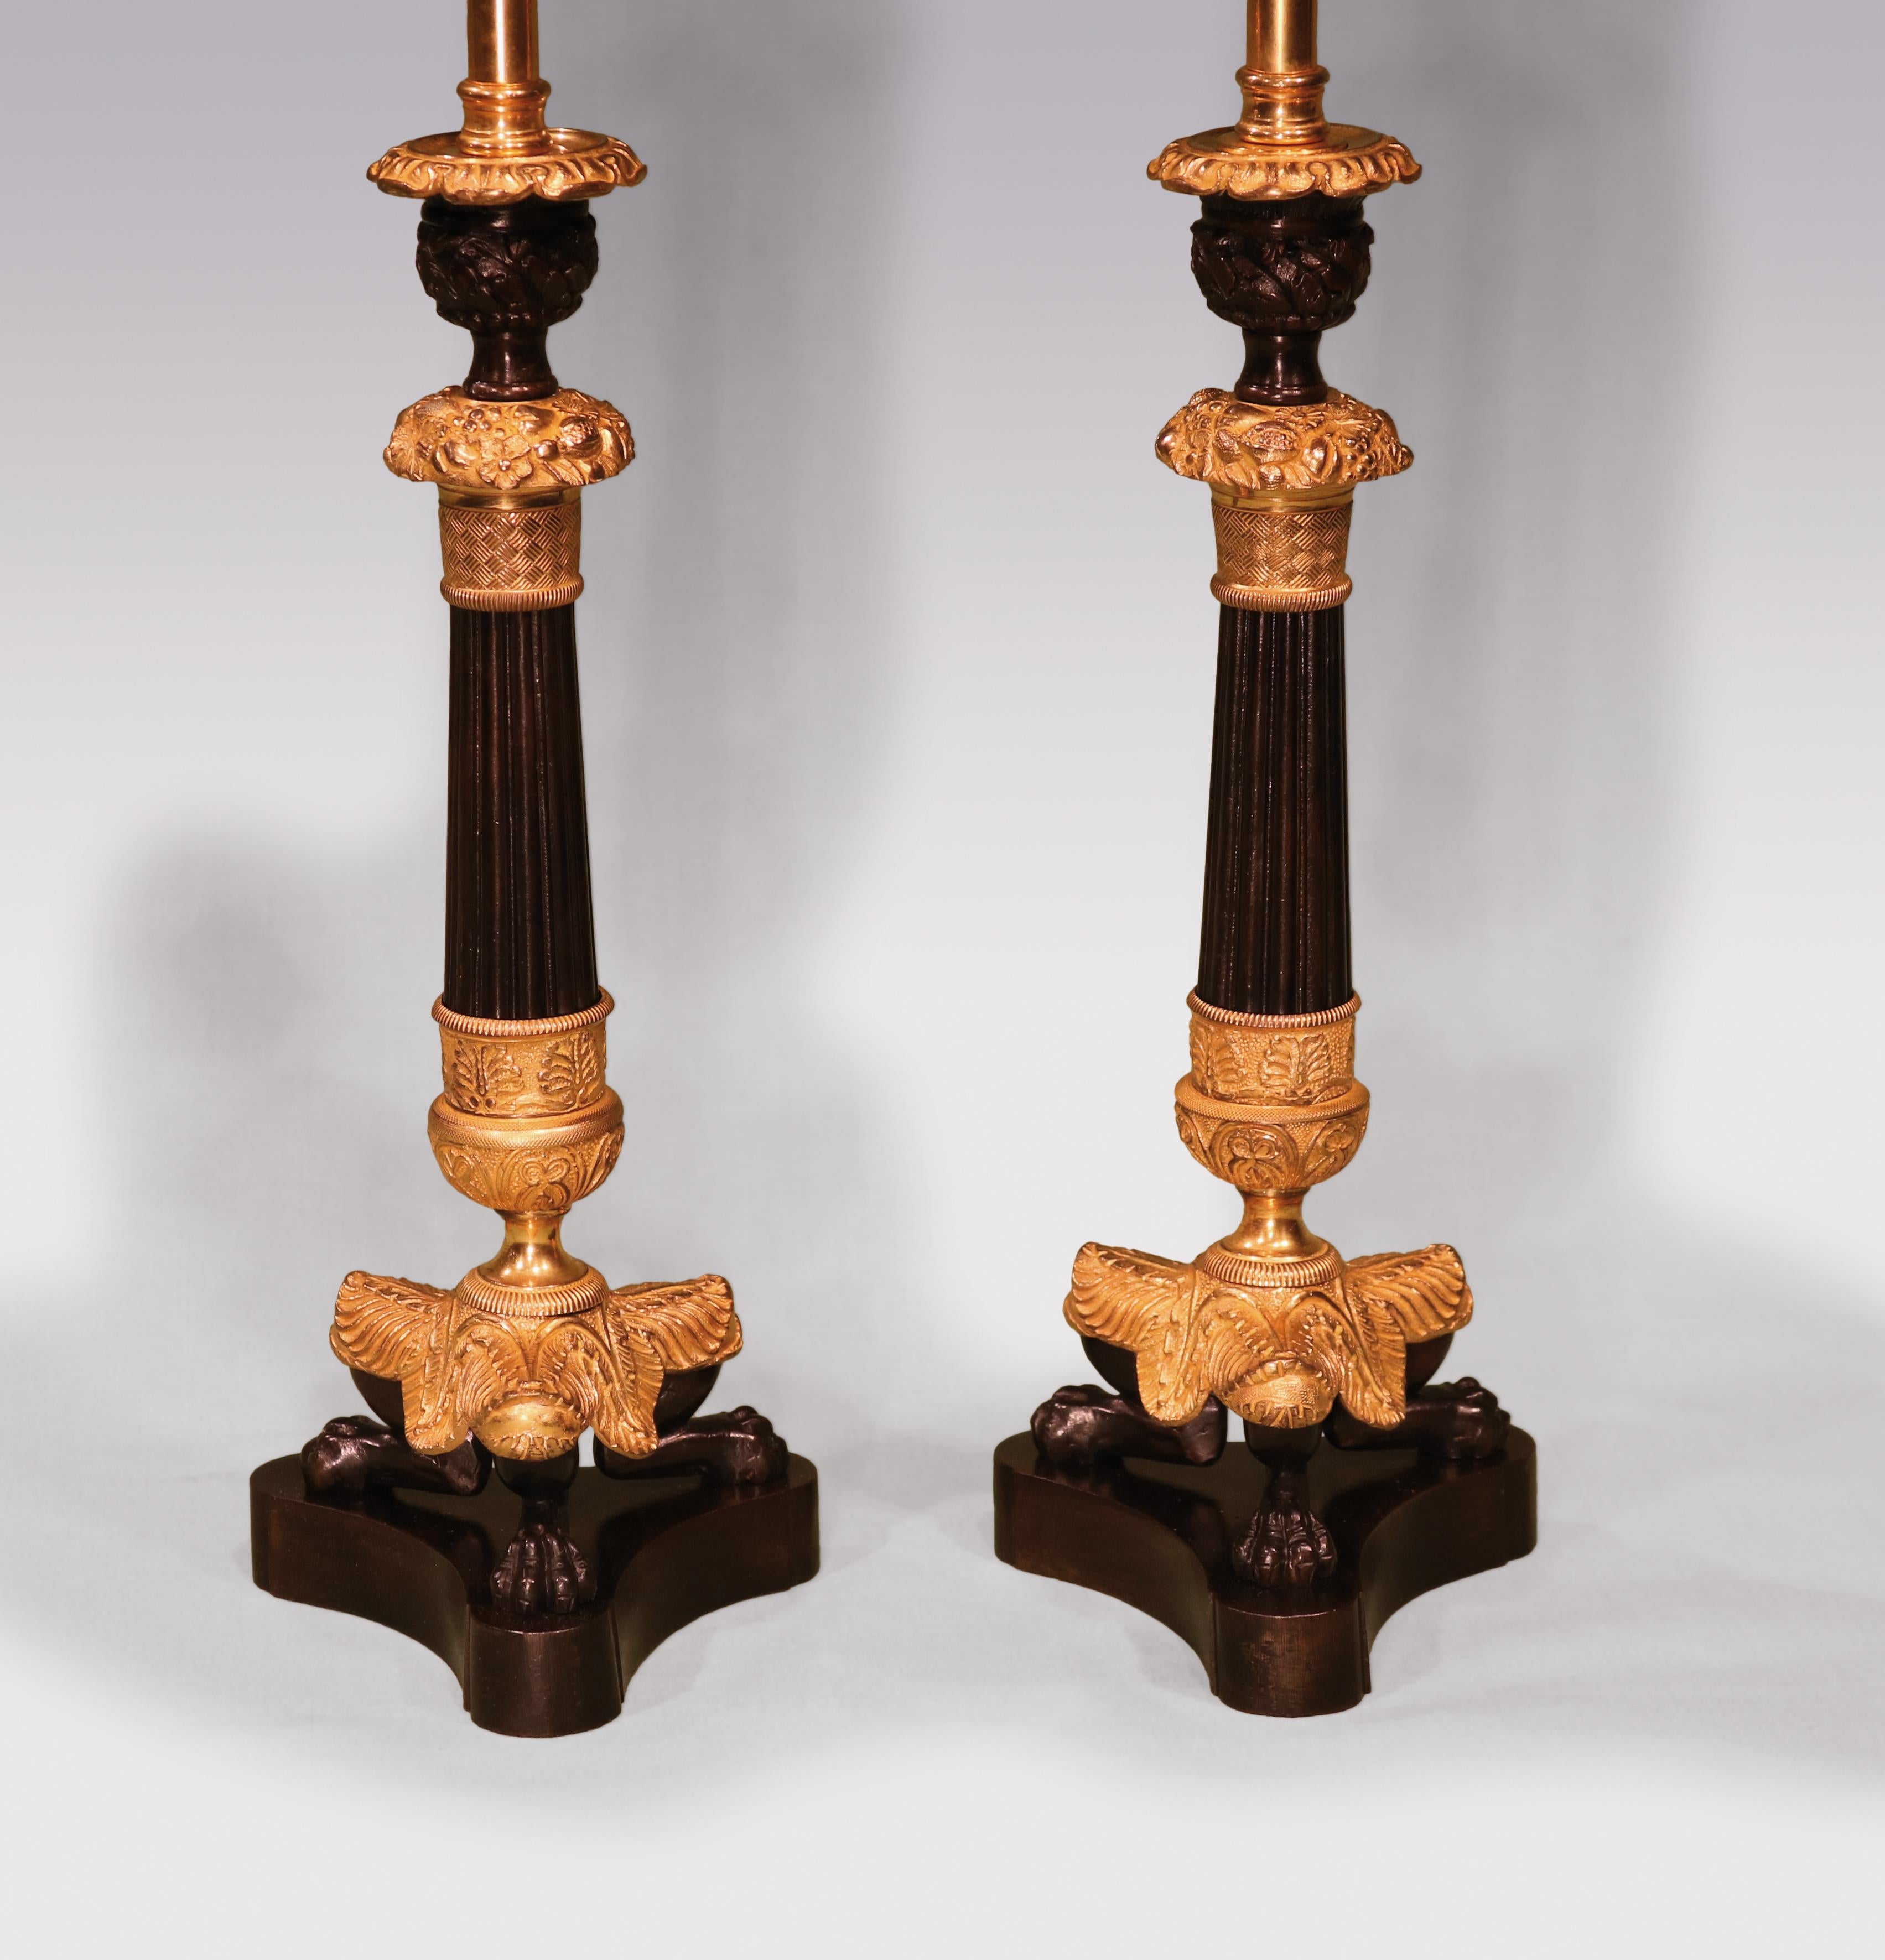 A pair of early 19th century bronze and ormolu candlesticks having urn shaped nozzles above engine turned and acanthus collared reeded tapering stems raised on leaf scroll, lions paw feet ending on concave platform bases. (now converted to lamps)